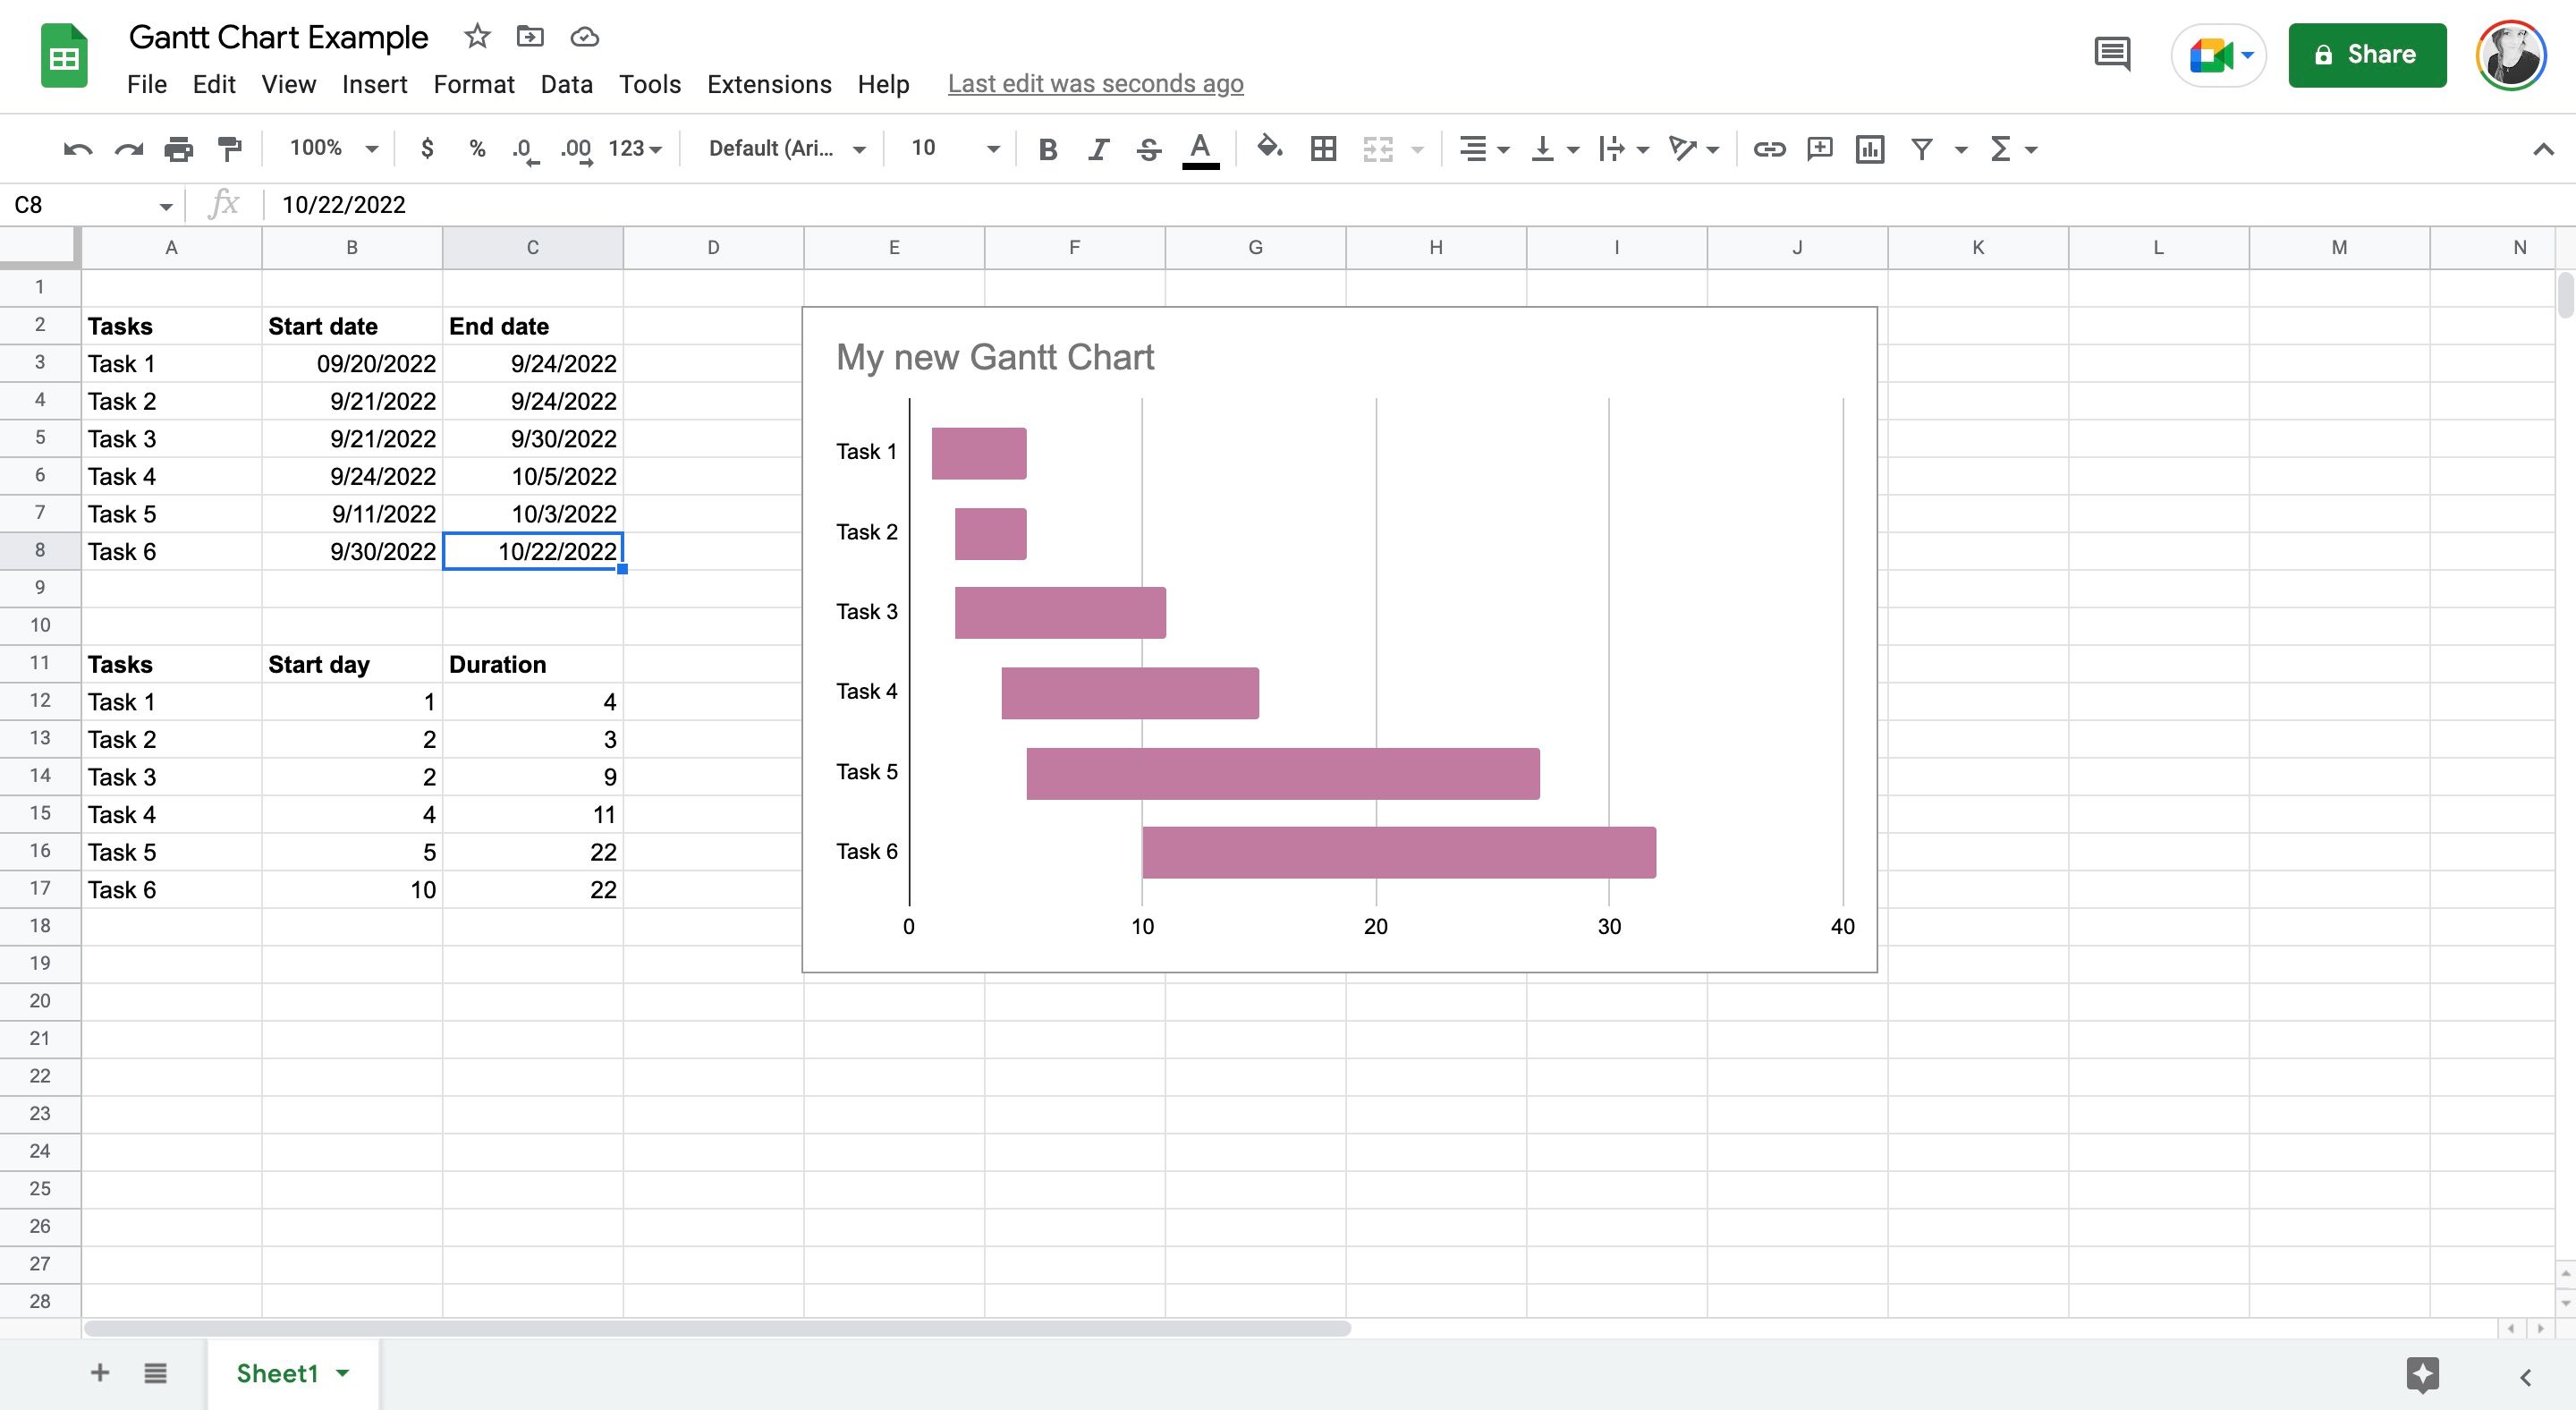 A finished Gantt chart in Sheets